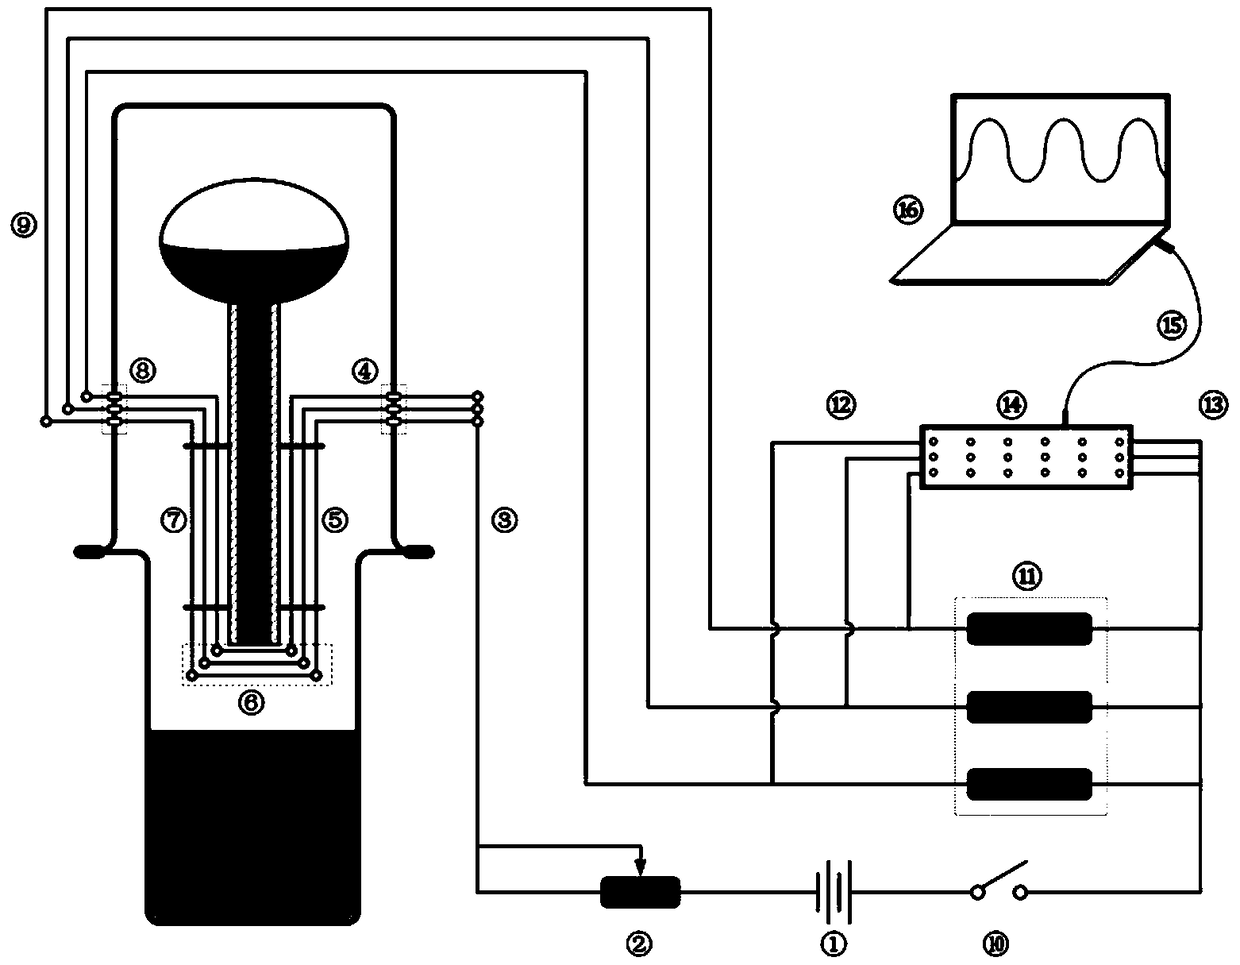 A system and method for measuring the velocity of a high-temperature melt